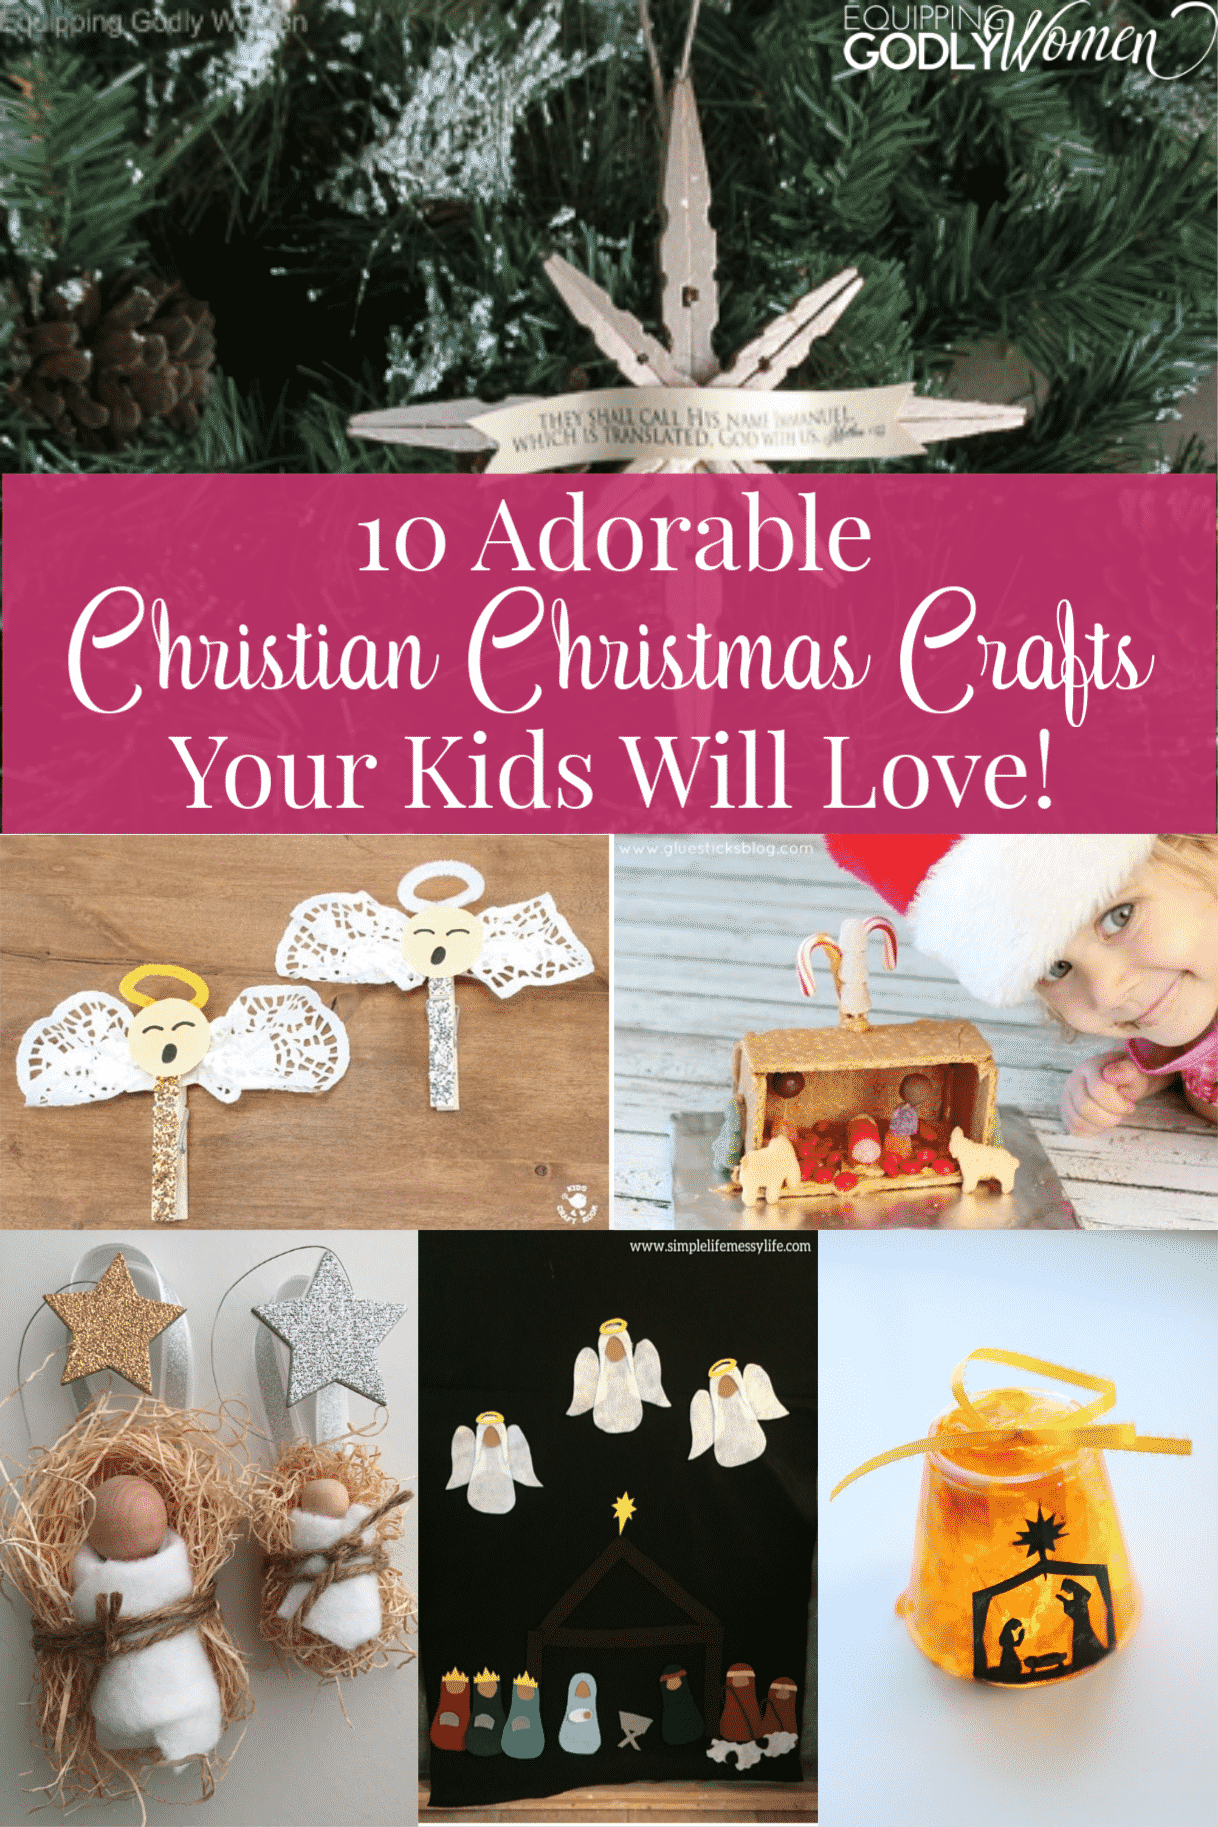 10 Adorable Christian Christmas Crafts Your Kids Will Love!